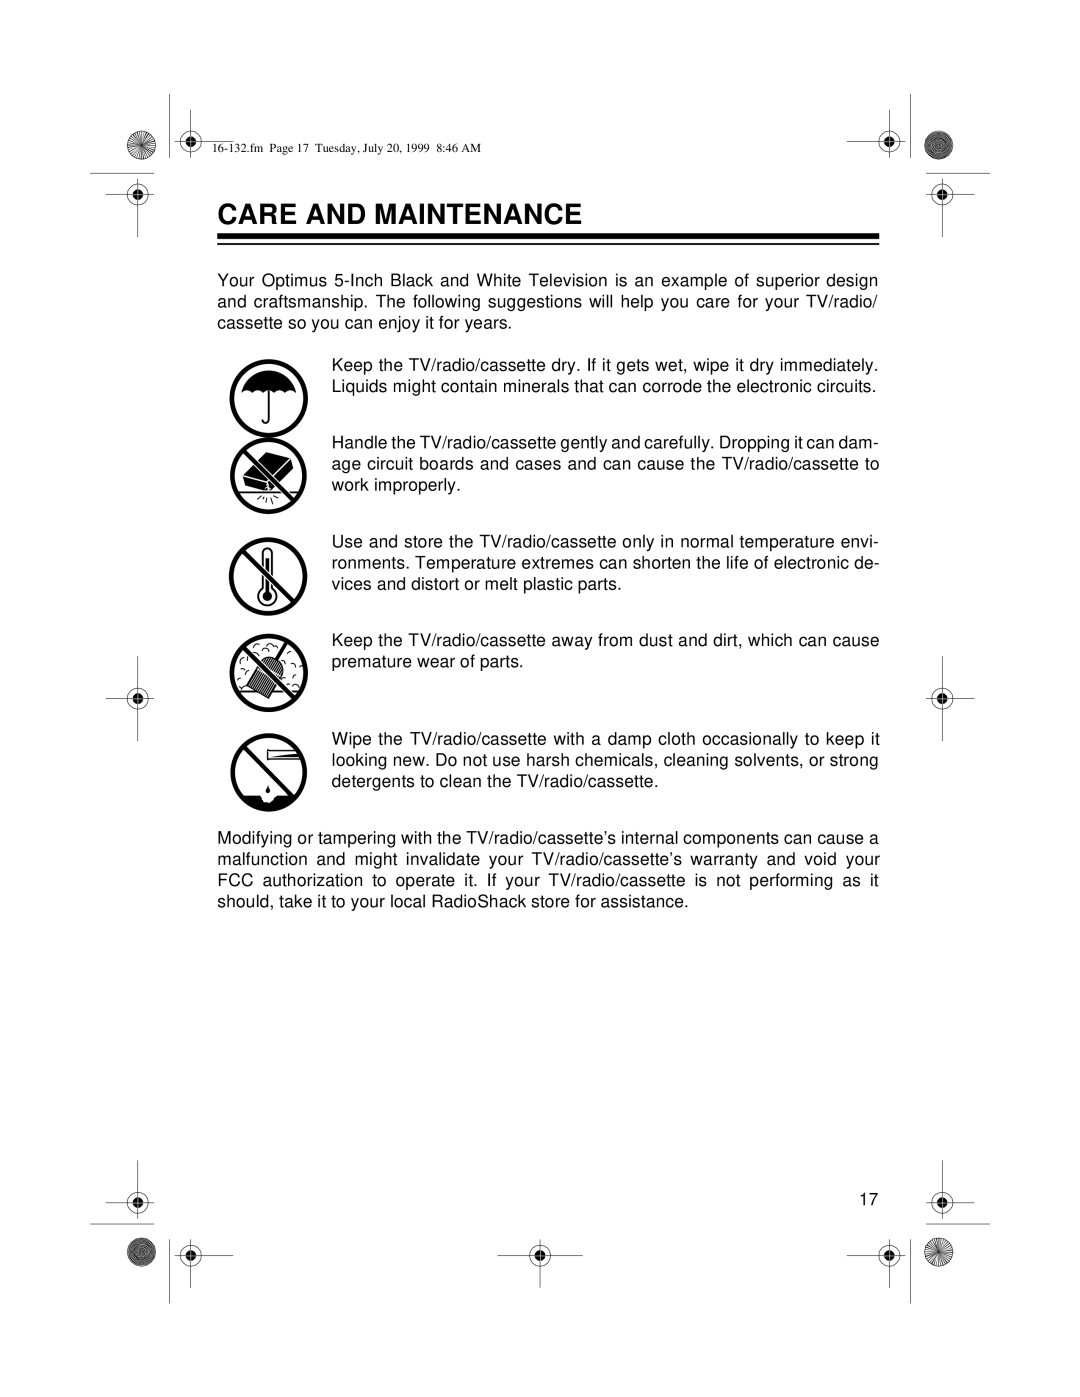 Optimus 16-132 owner manual Care And Maintenance, fm Page 17 Tuesday, July 20, 1999 846 AM 